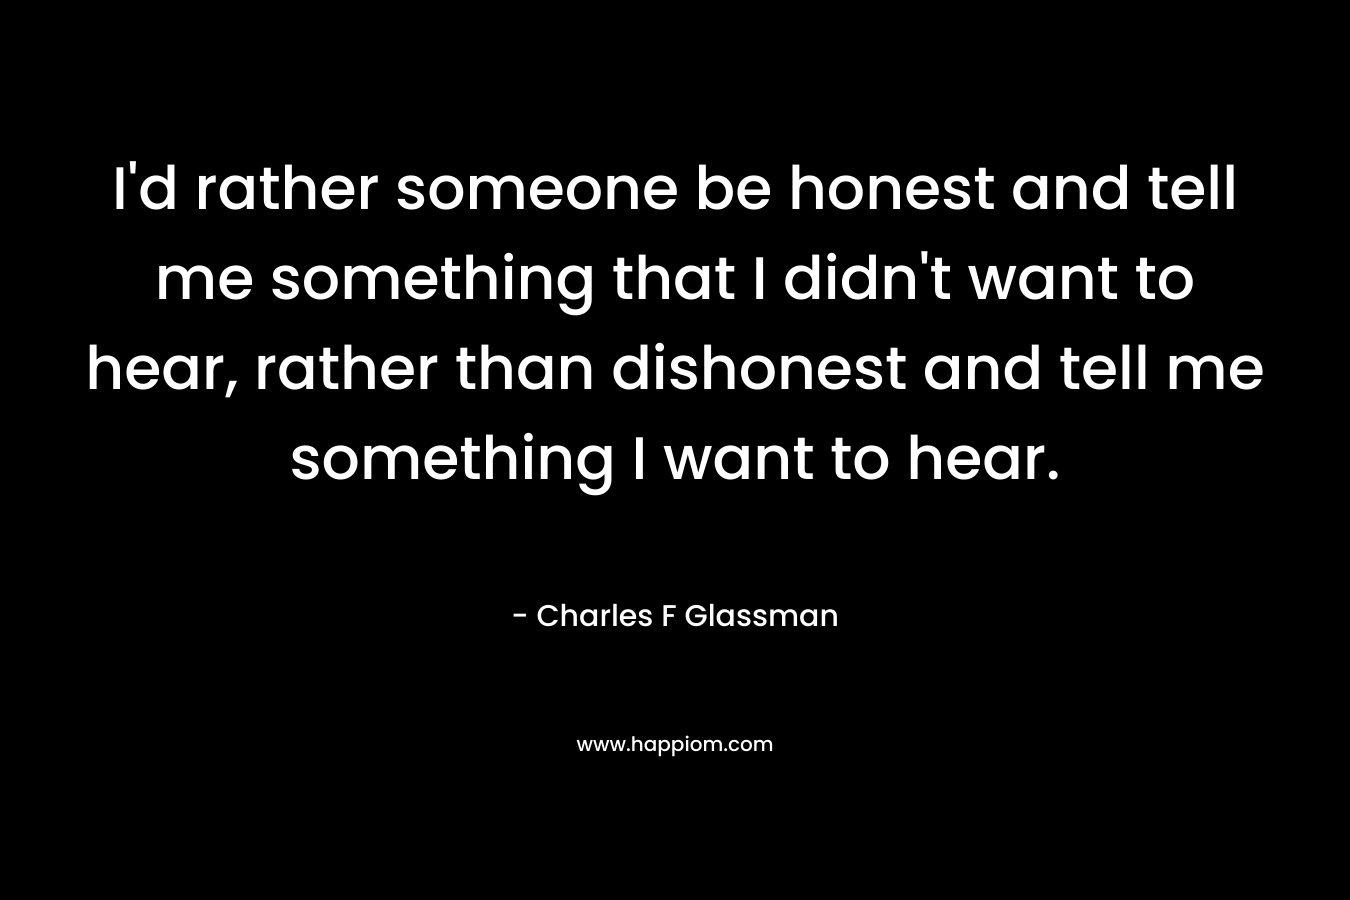 I'd rather someone be honest and tell me something that I didn't want to hear, rather than dishonest and tell me something I want to hear.